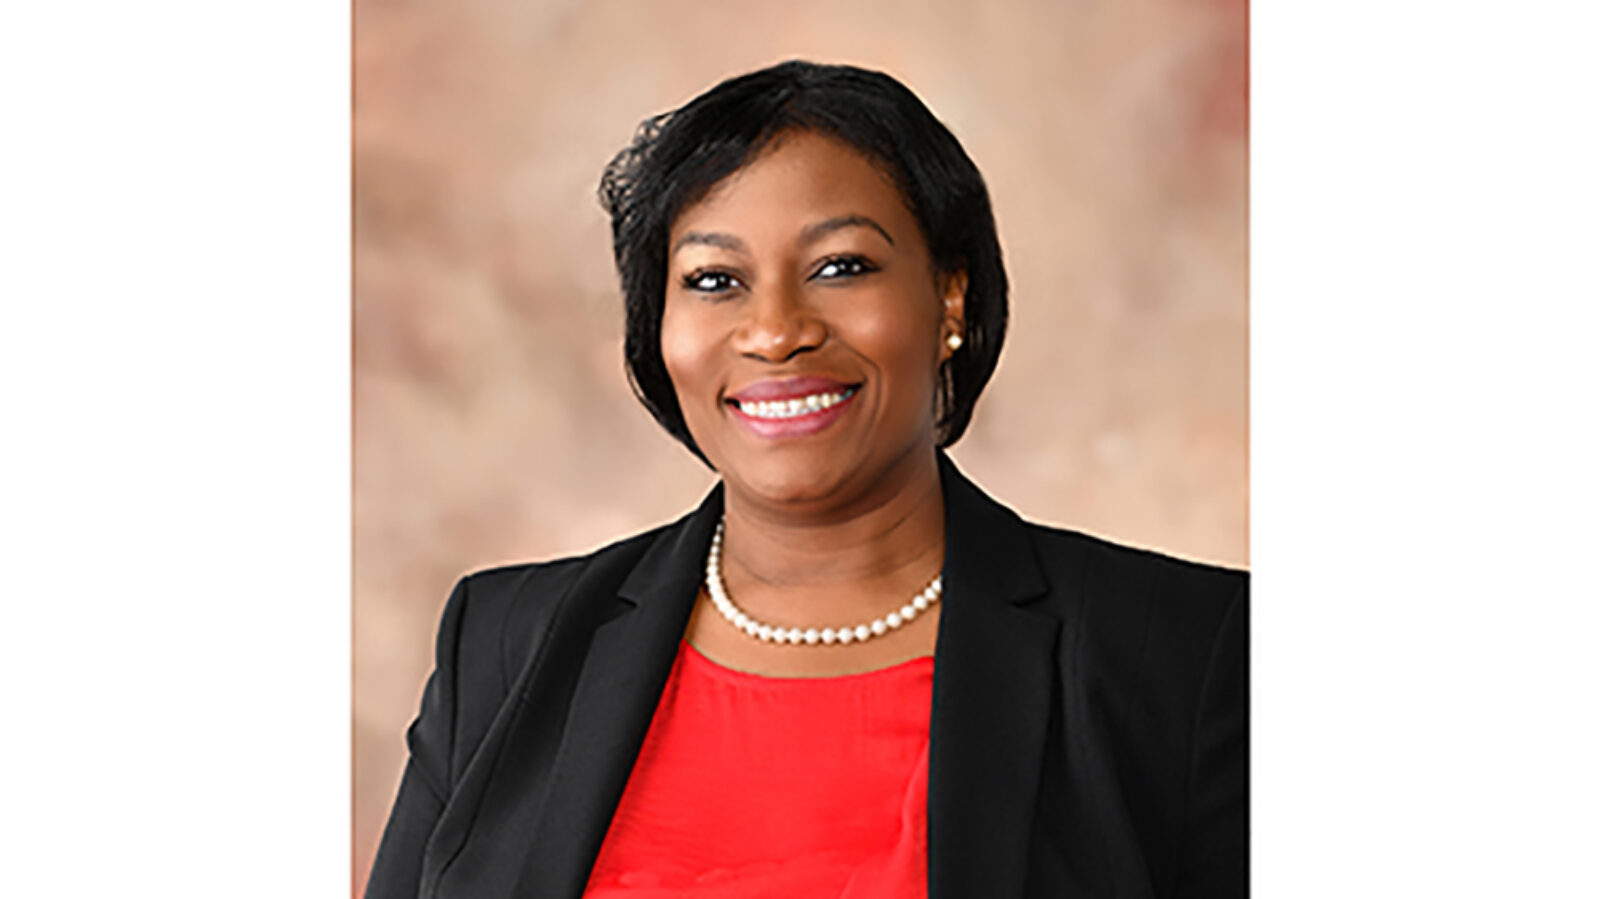 Congratulations to LaTivia Carr on promotion to VP and Chief Nursing Officer